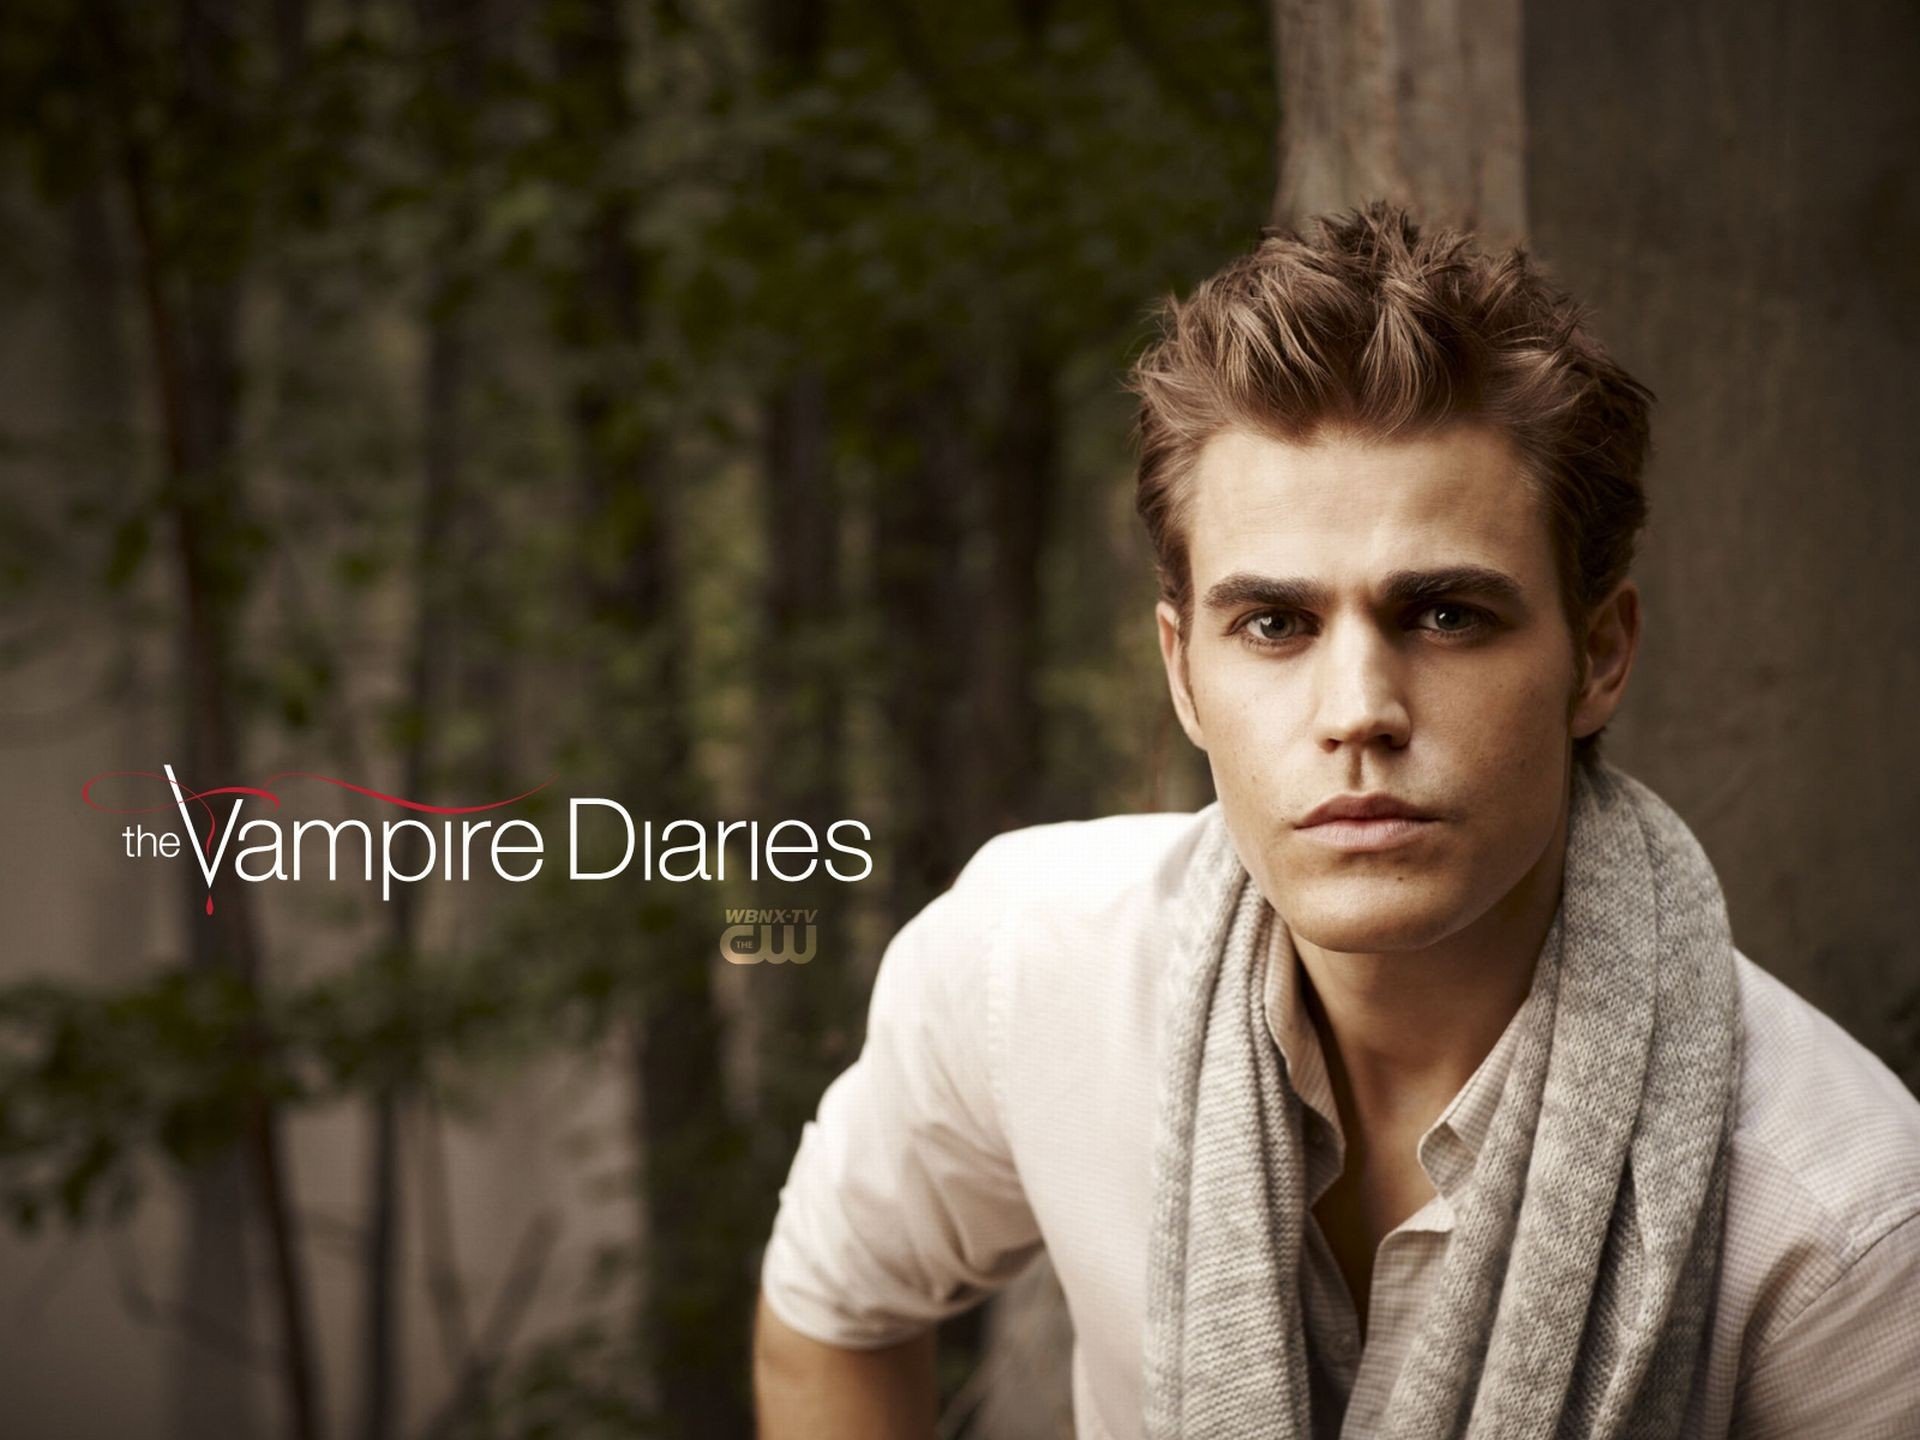 The Vampire Diaries Paul Wesley Wallpapers Hd Desktop And Mobile Backgrounds 